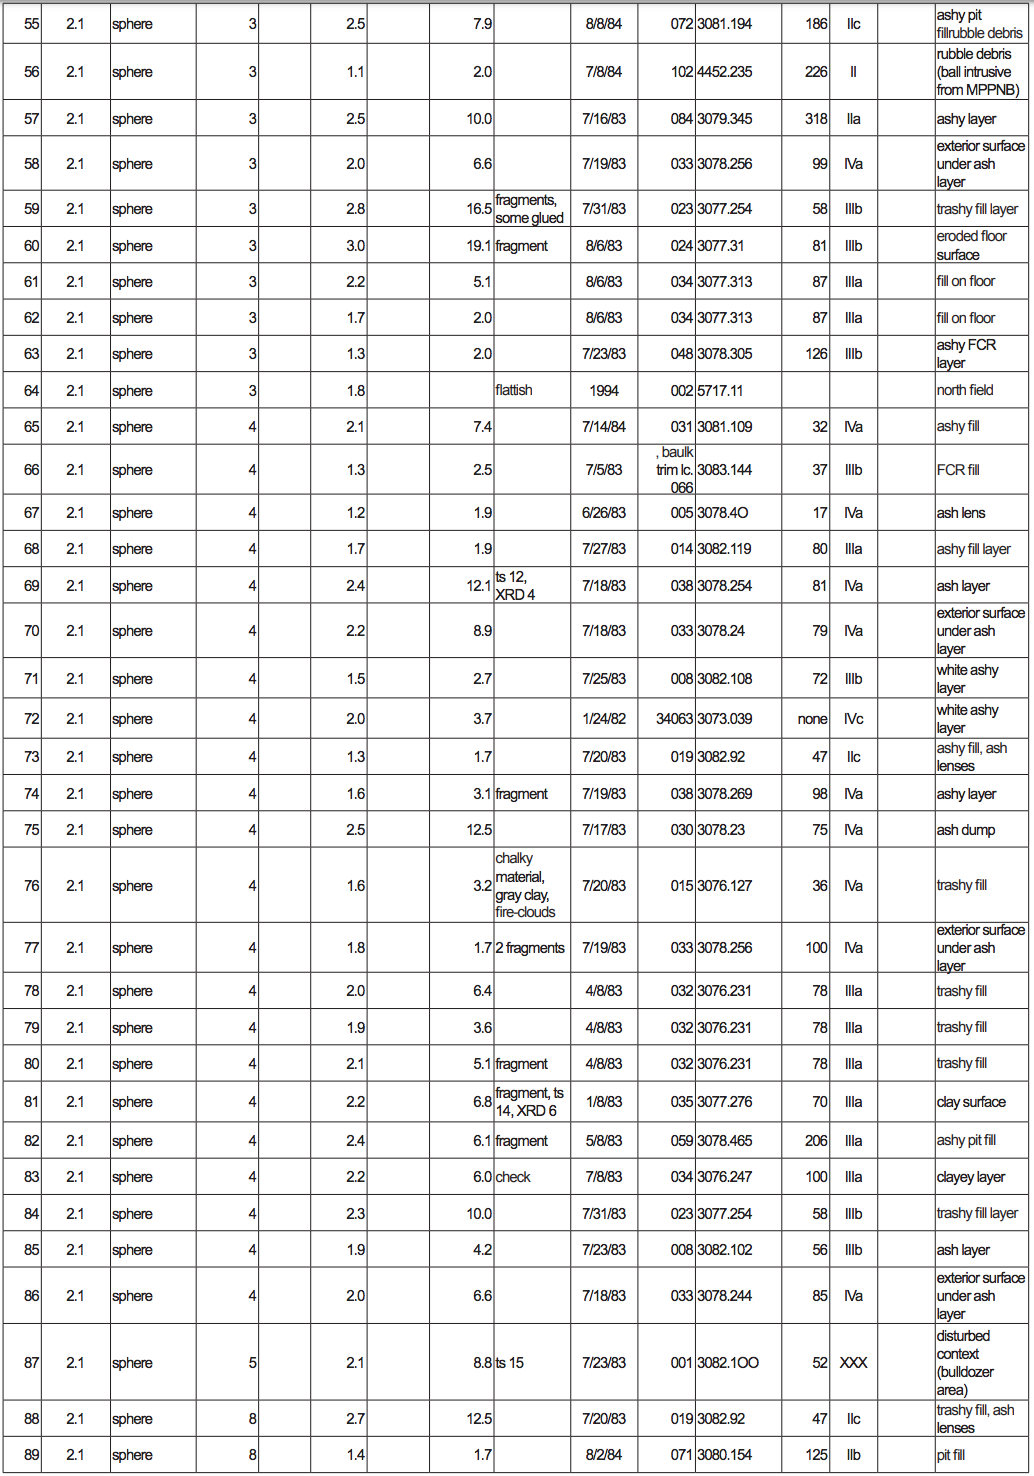 Objects 55-89 in the 'Ain Ghazal Token Catalogue, By Type And Subtype table